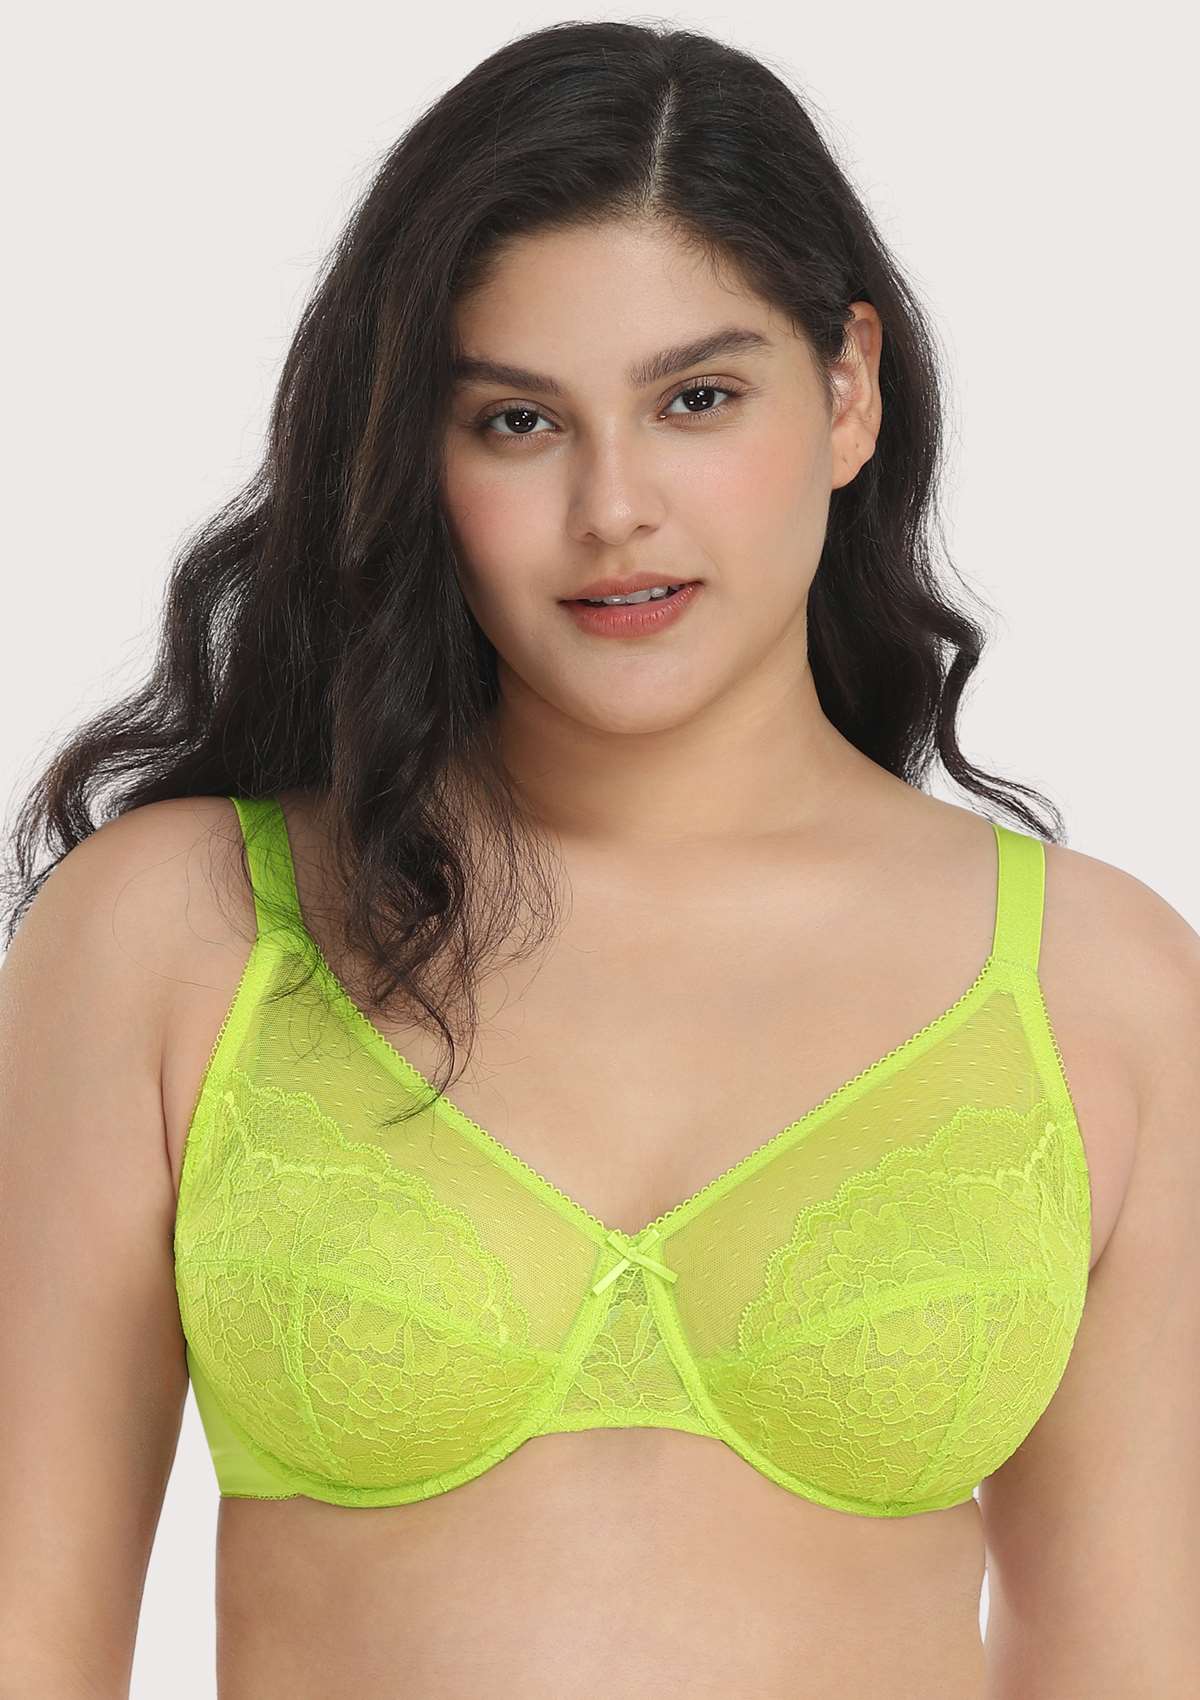 HSIA Enchante Full Cup Minimizing Bra: Supportive Unlined Lace Bra - Lime Green / 44 / DDD/F